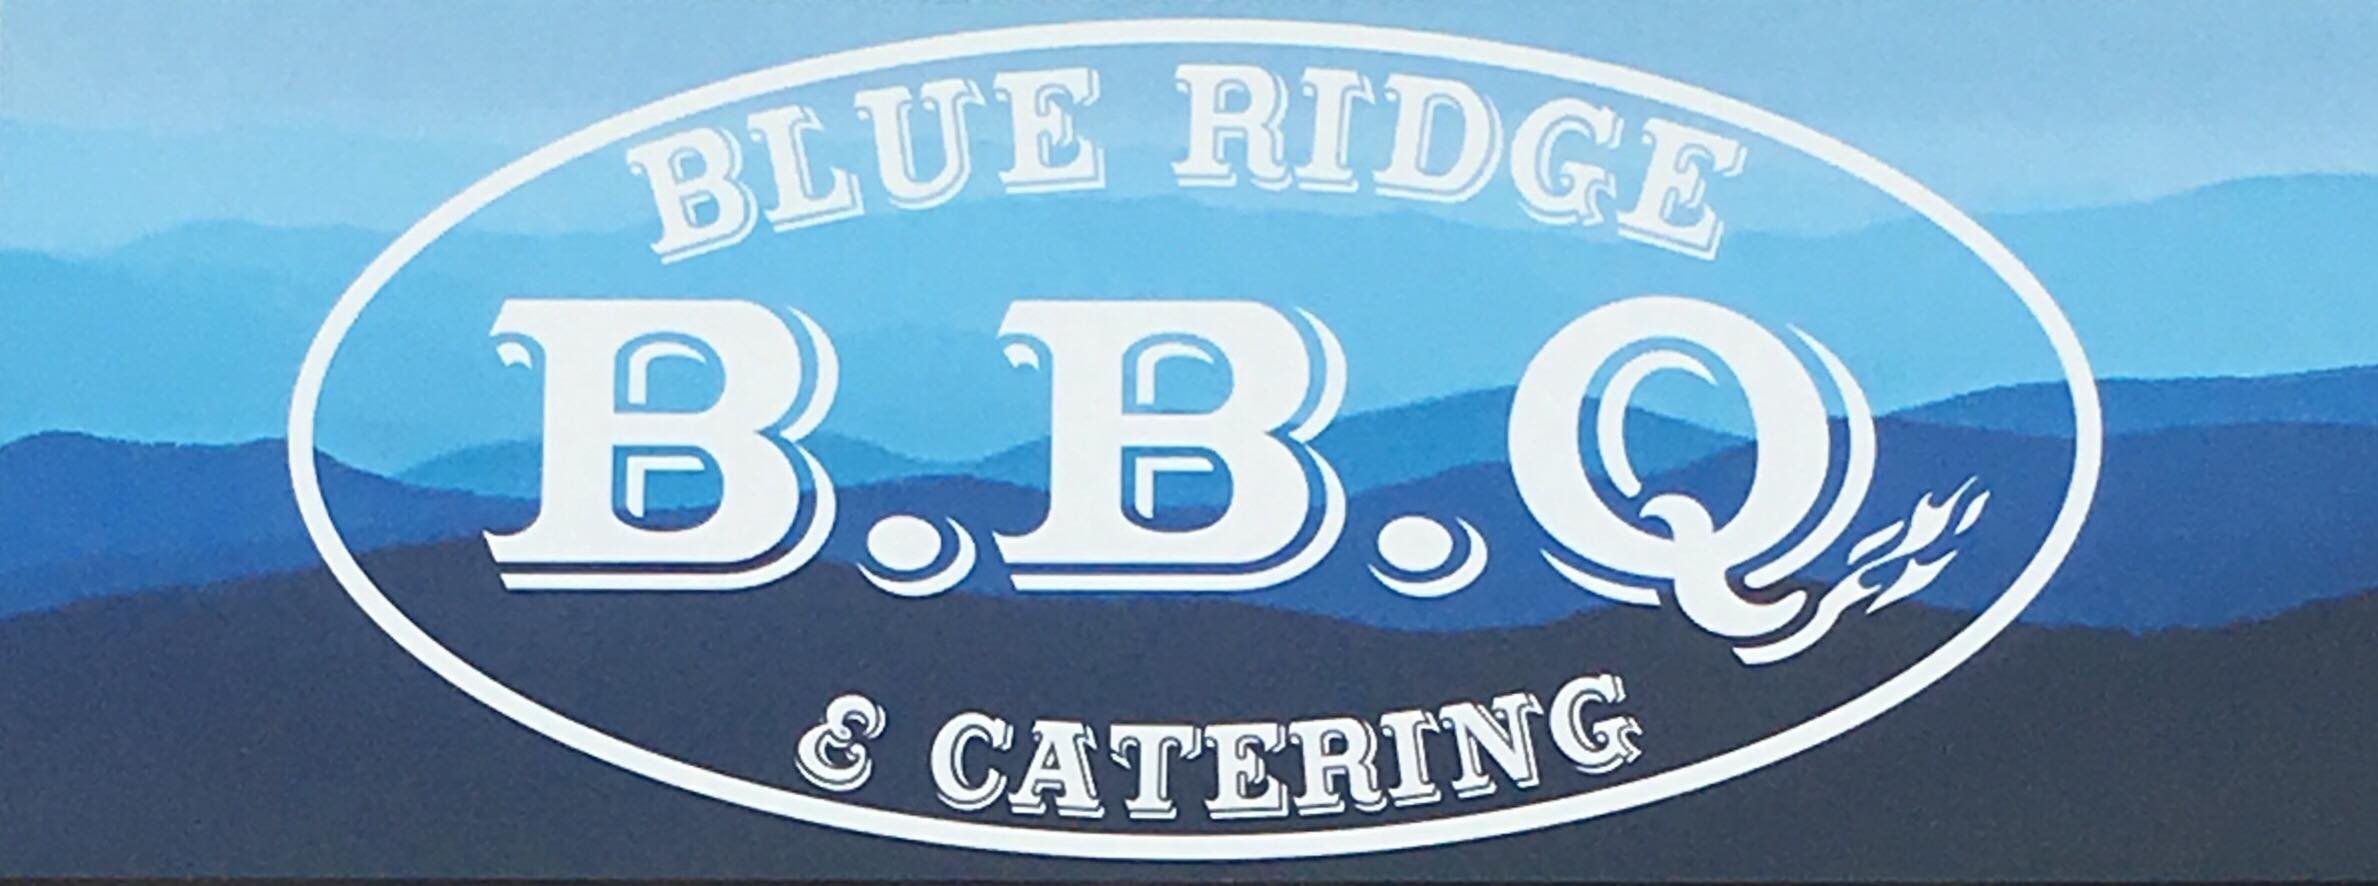 Blue Ridge BBQ and Catering